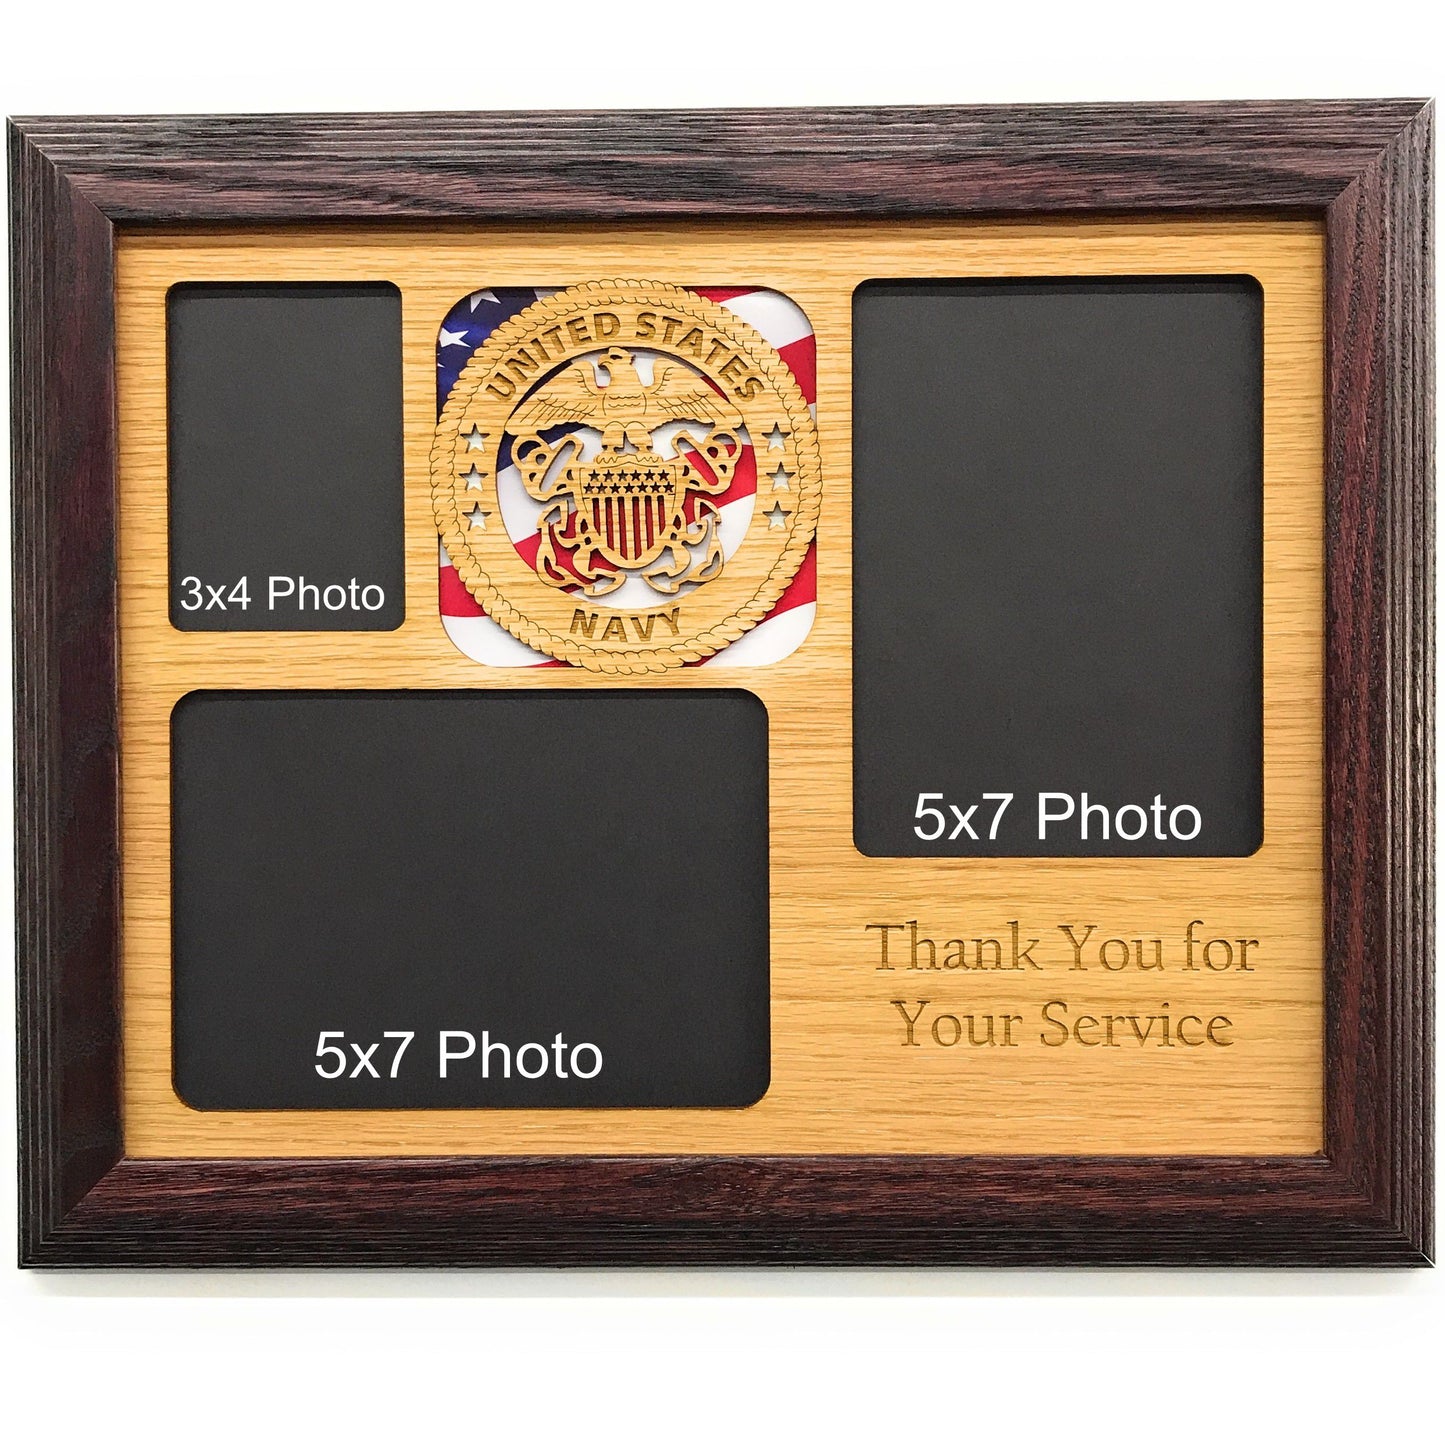 US Navy Picture Frame